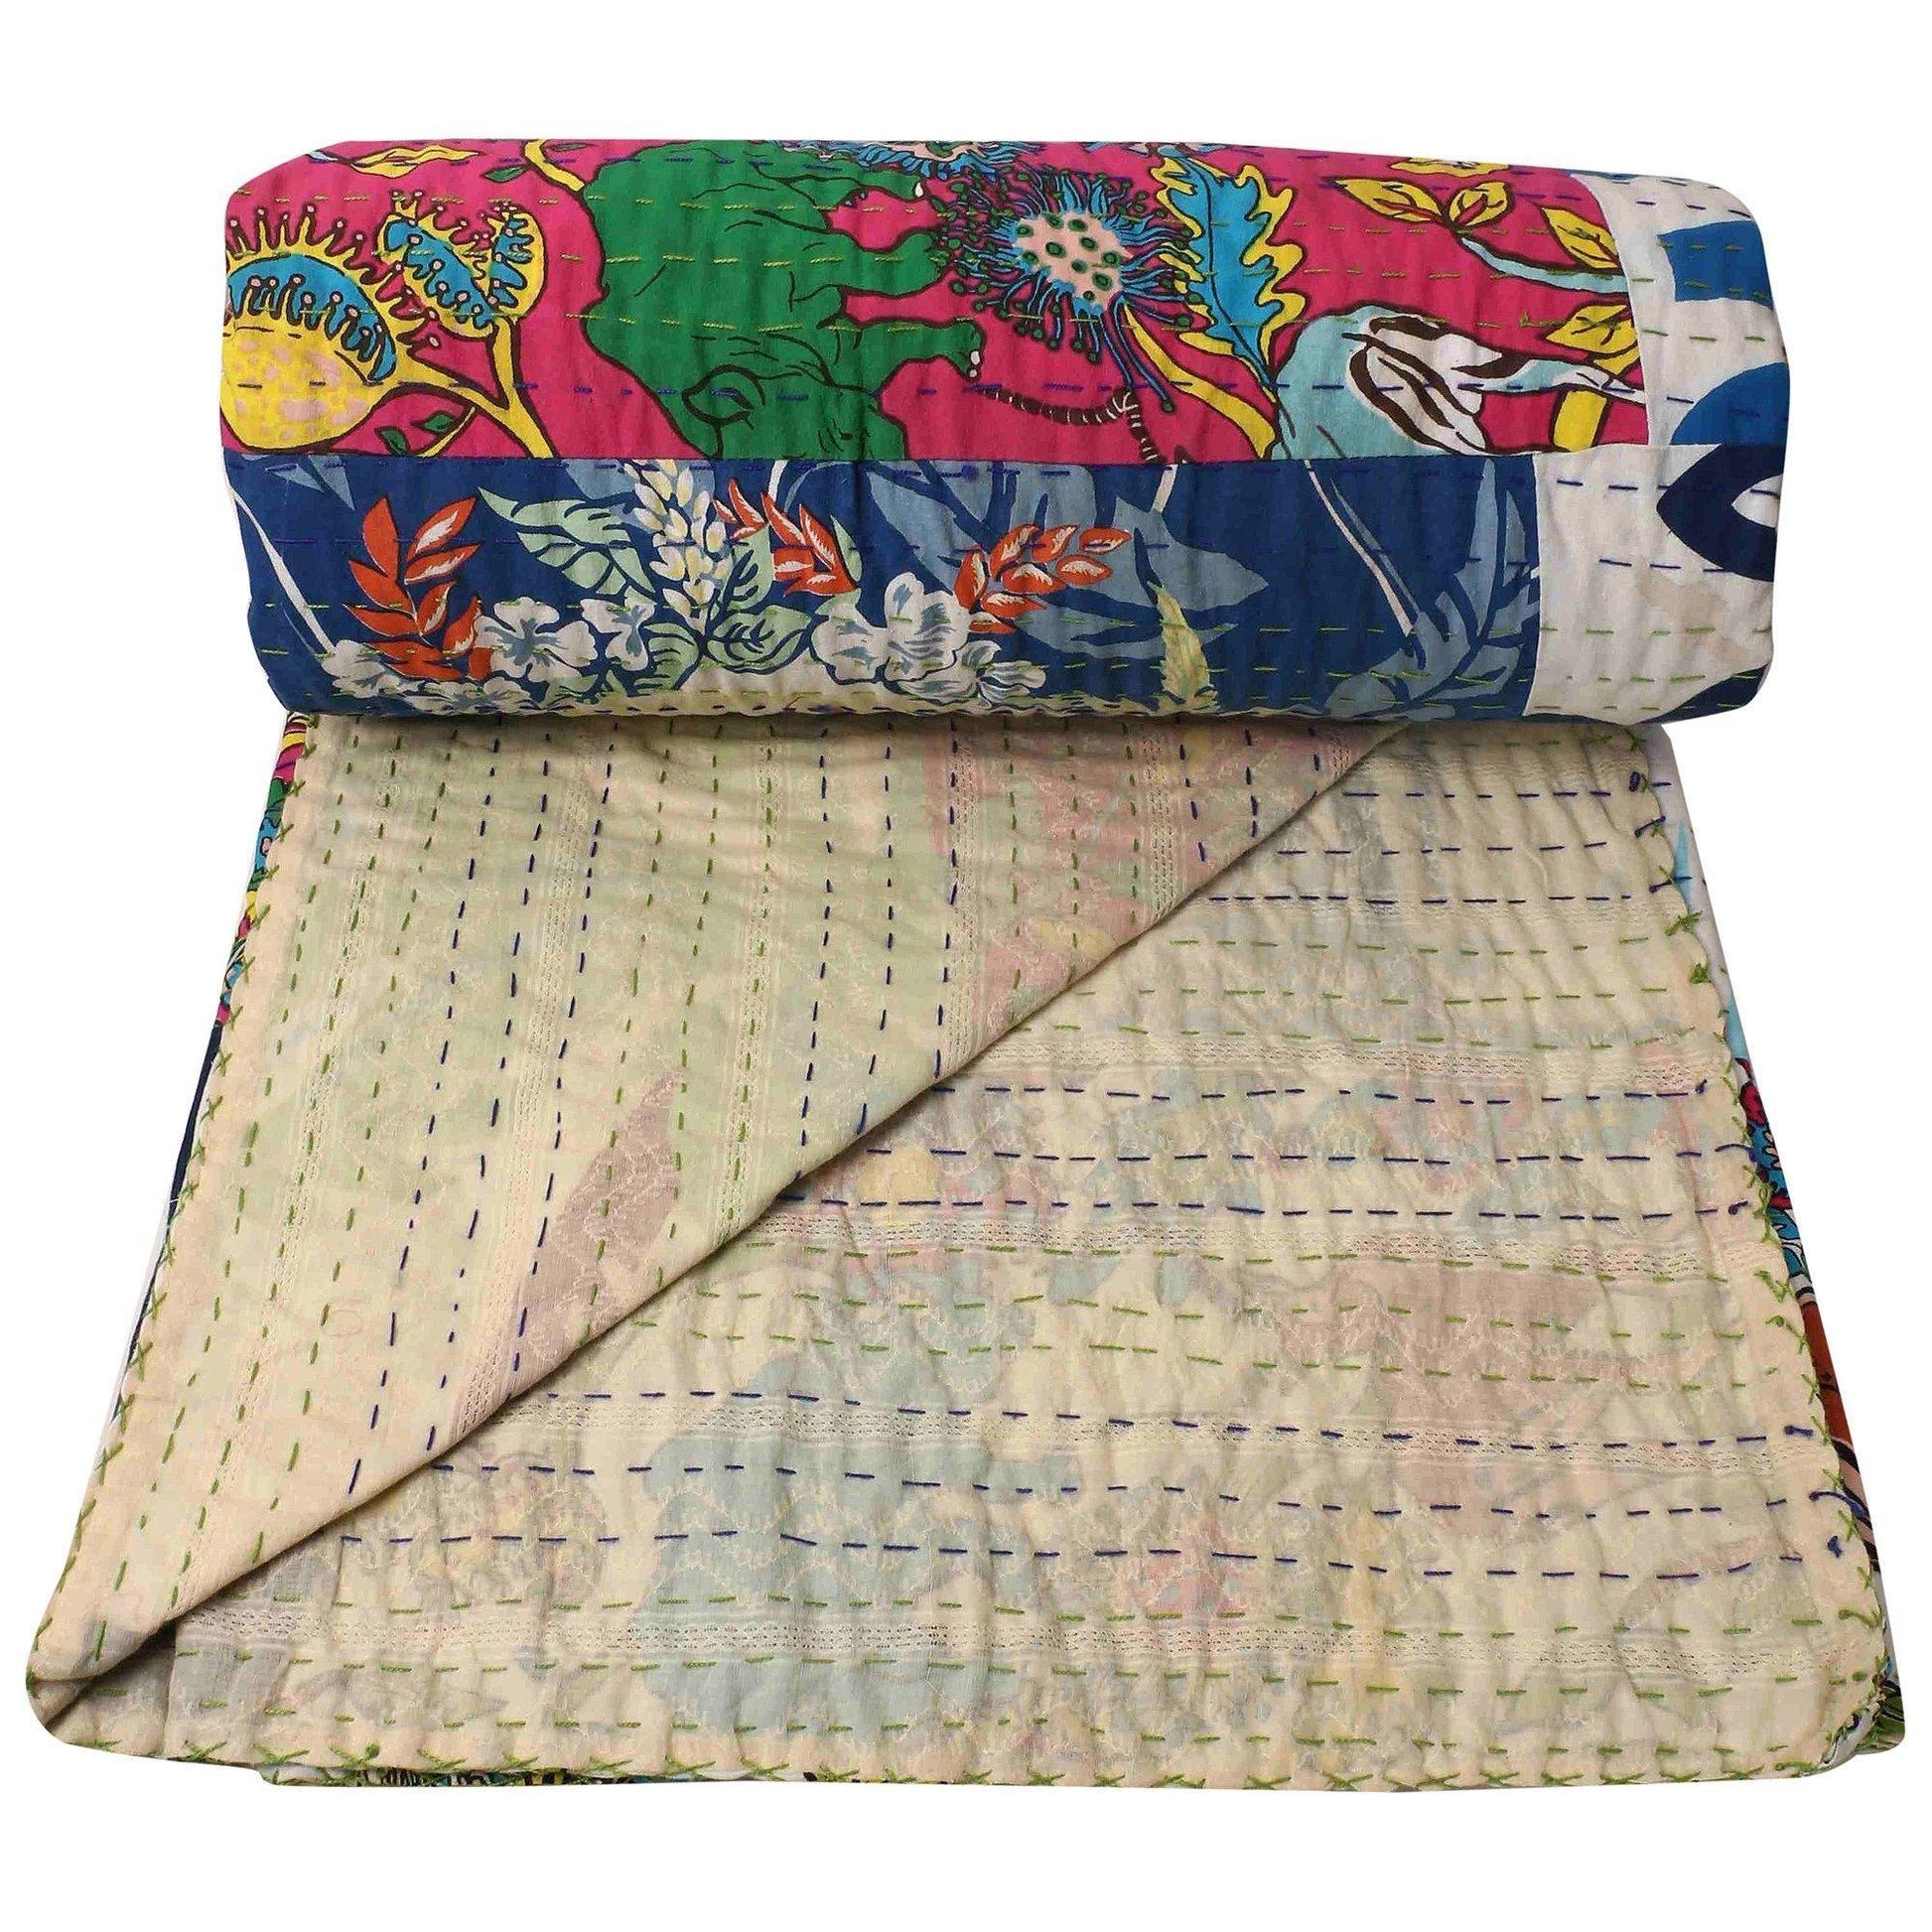 Quirky Patchwork Kantha Quilted King Bedcover - The Teal Thread